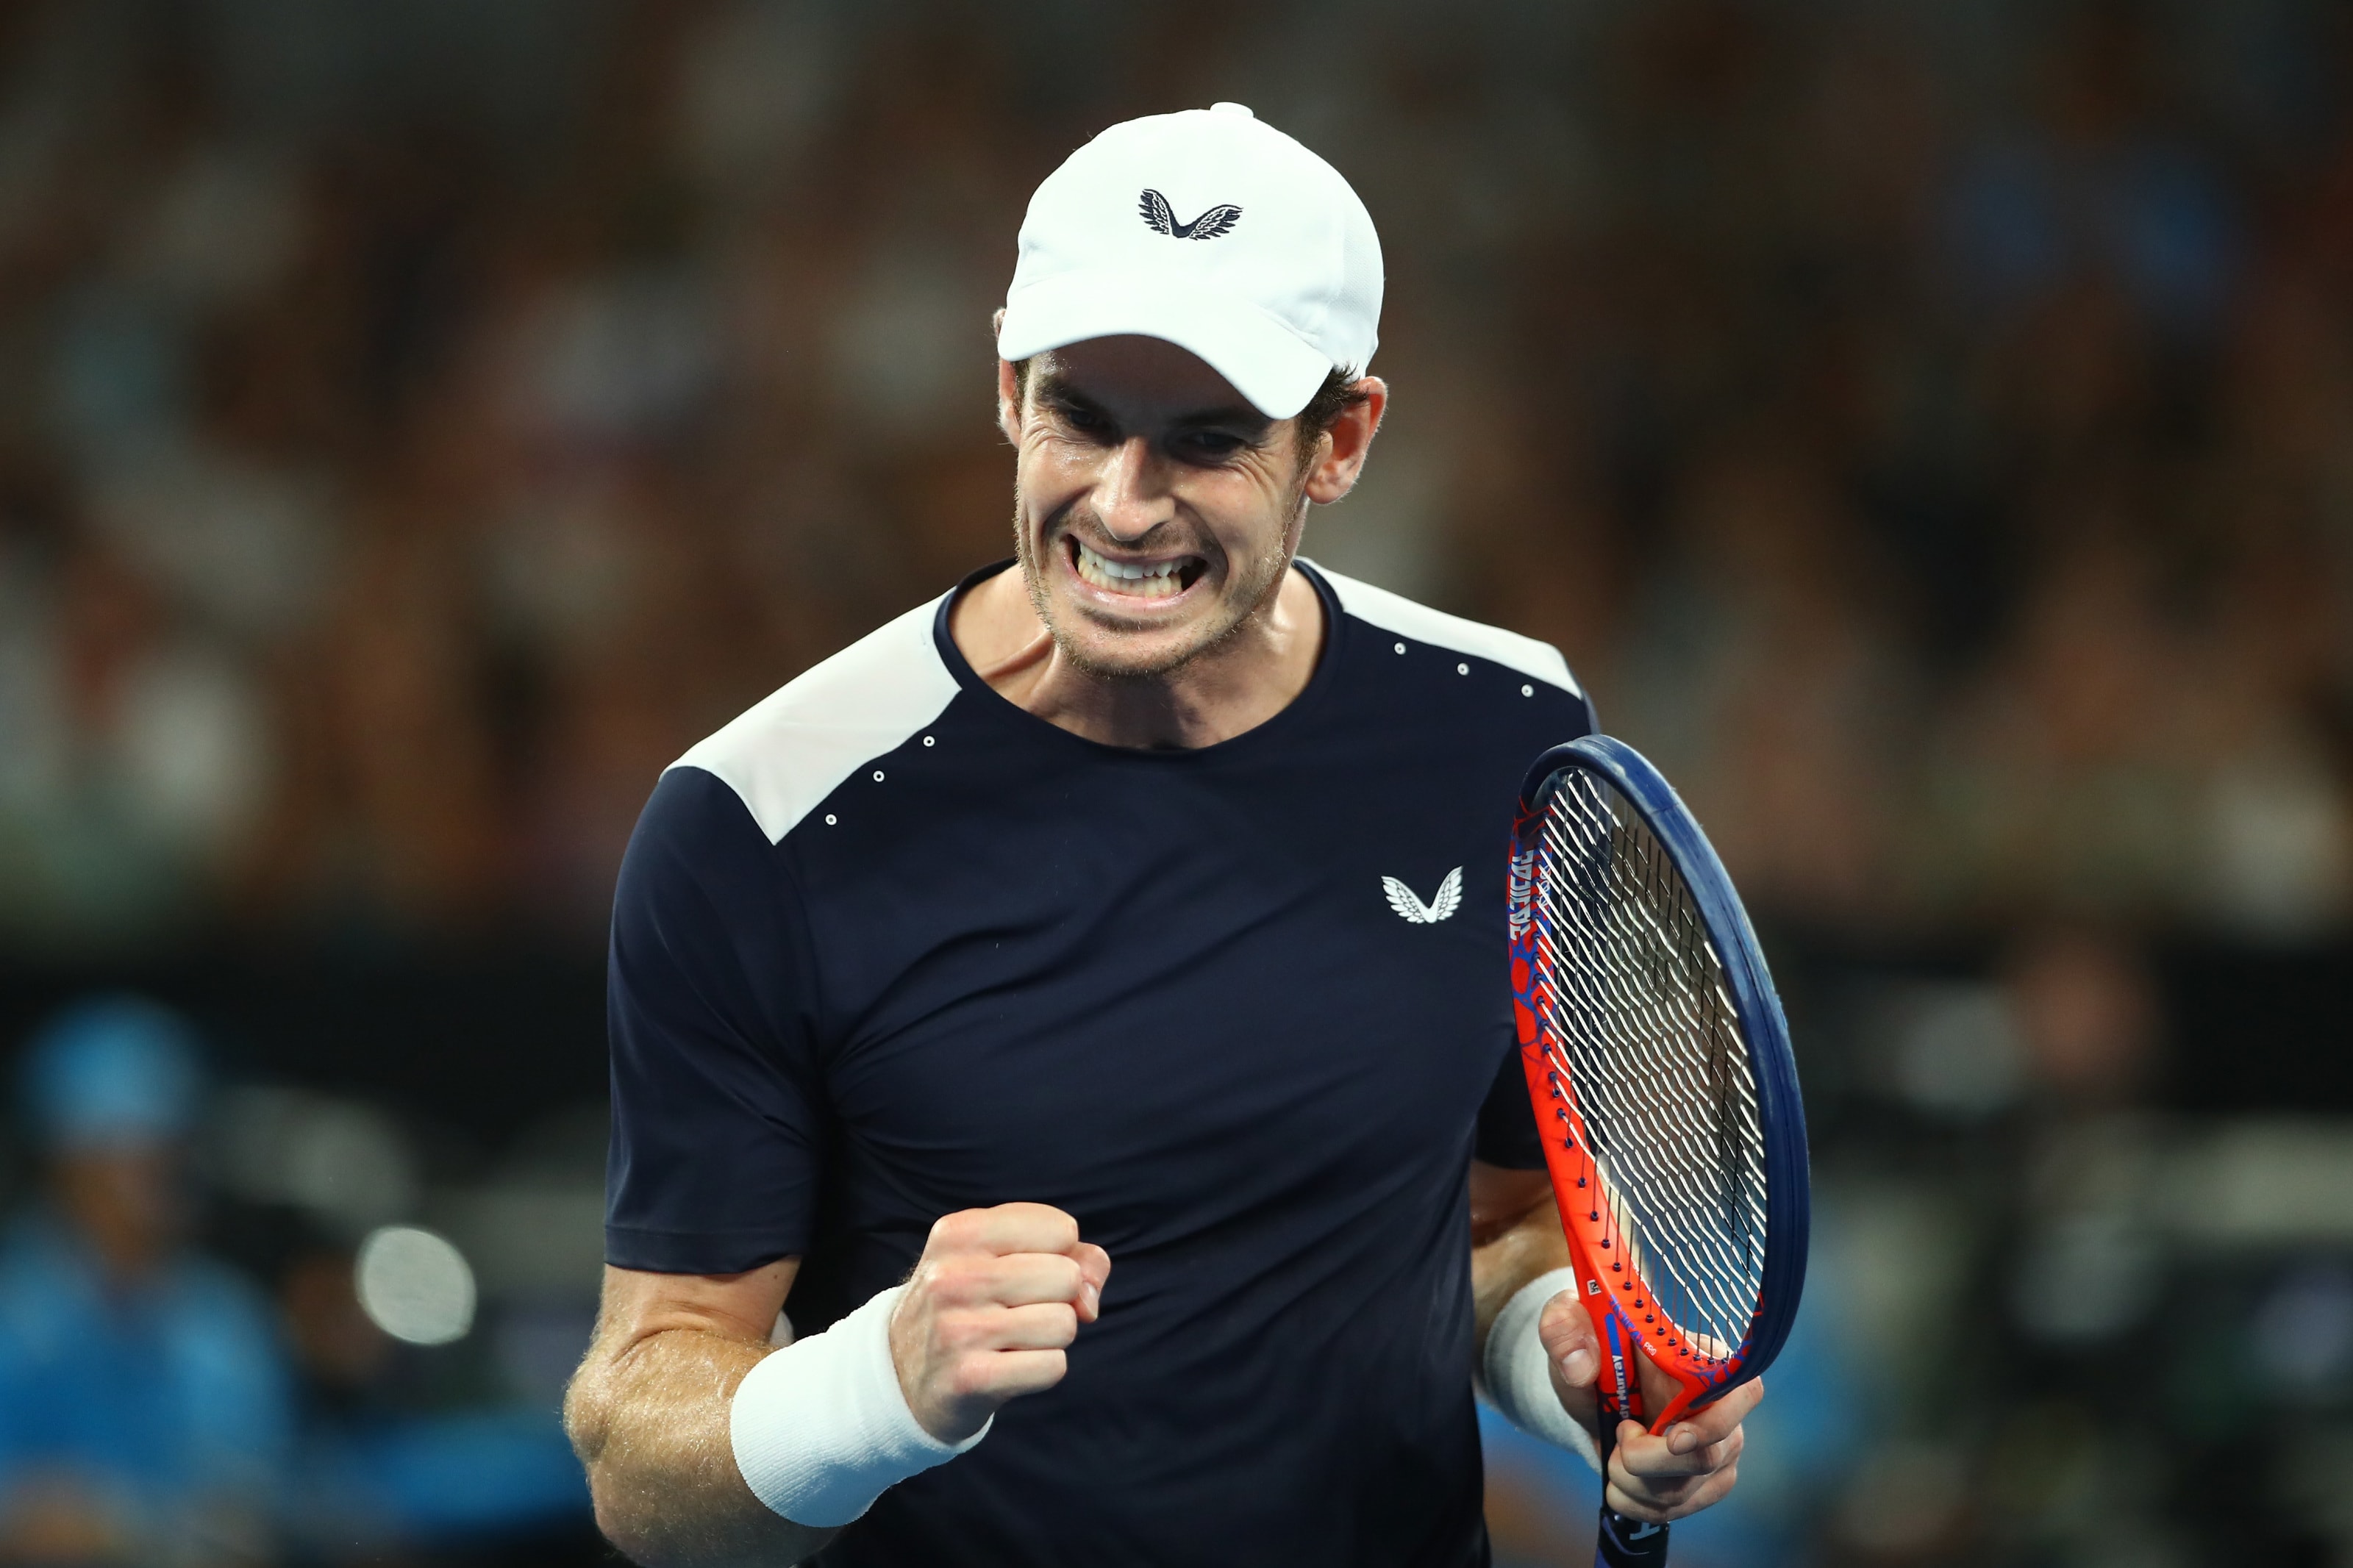 Rektangel teenager Seks RANKED: Top 10 Greatest Andy Murray Tennis Matches Ever